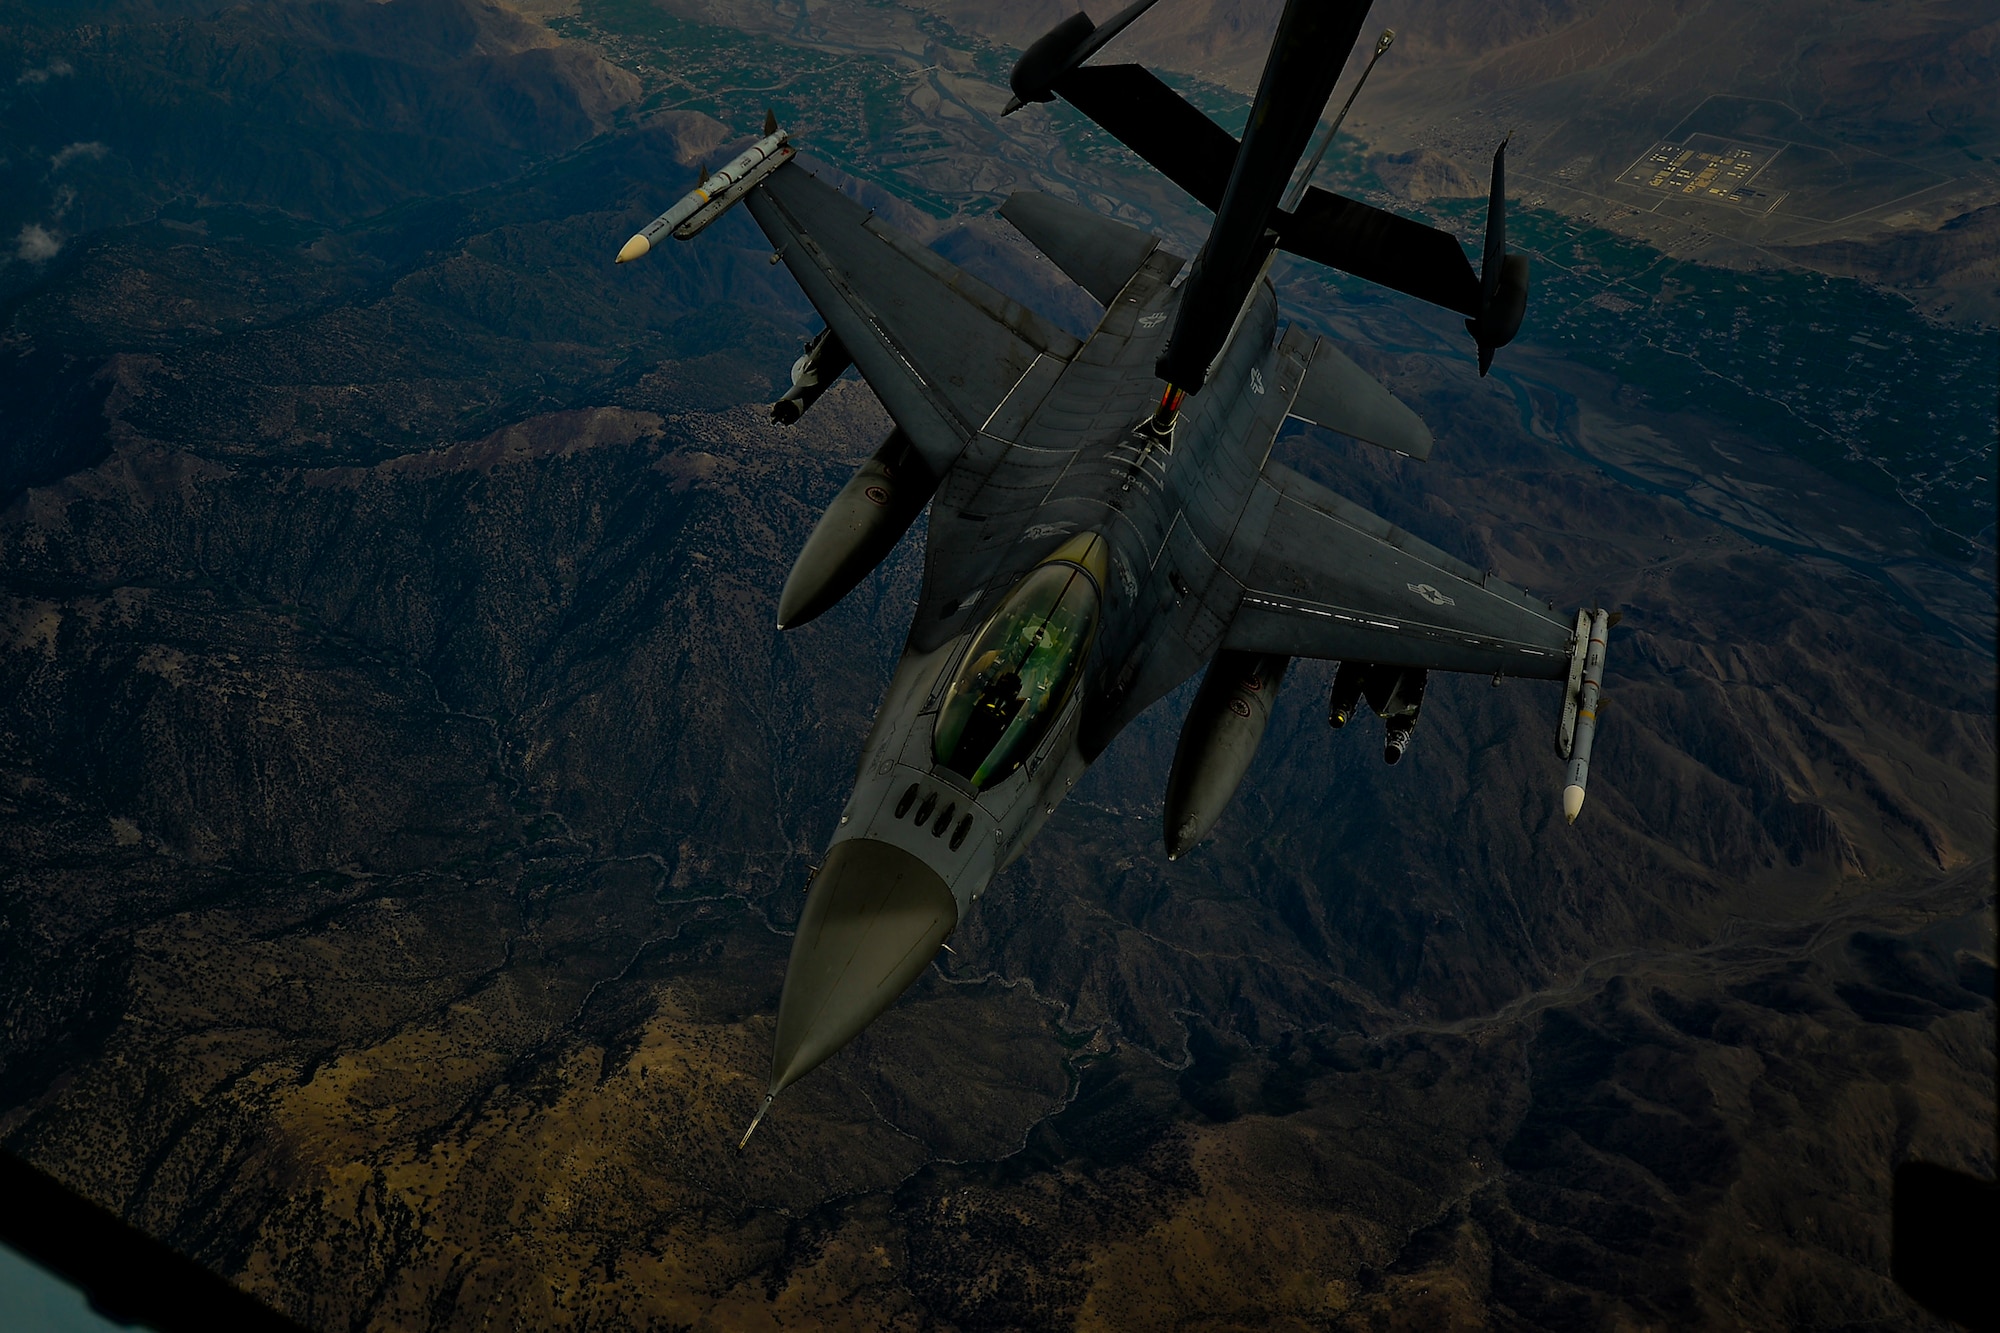 A U.S. Air Force F-16 Fighting Falcon assigned to the 455th Air Expeditionary Wing, Bagram Airfield, Afghanistan receives fuel over Afghanistan from a KC-10 Extender, March 9, 2018.
 The F-16 provides cover from above for Afghan and coalition forces on the ground, deterring insurgent activity and allowing friendly freedom of movement for troops. 
 (U.S. Air Force photo by Tech. Sgt. Anthony Nelson Jr.)